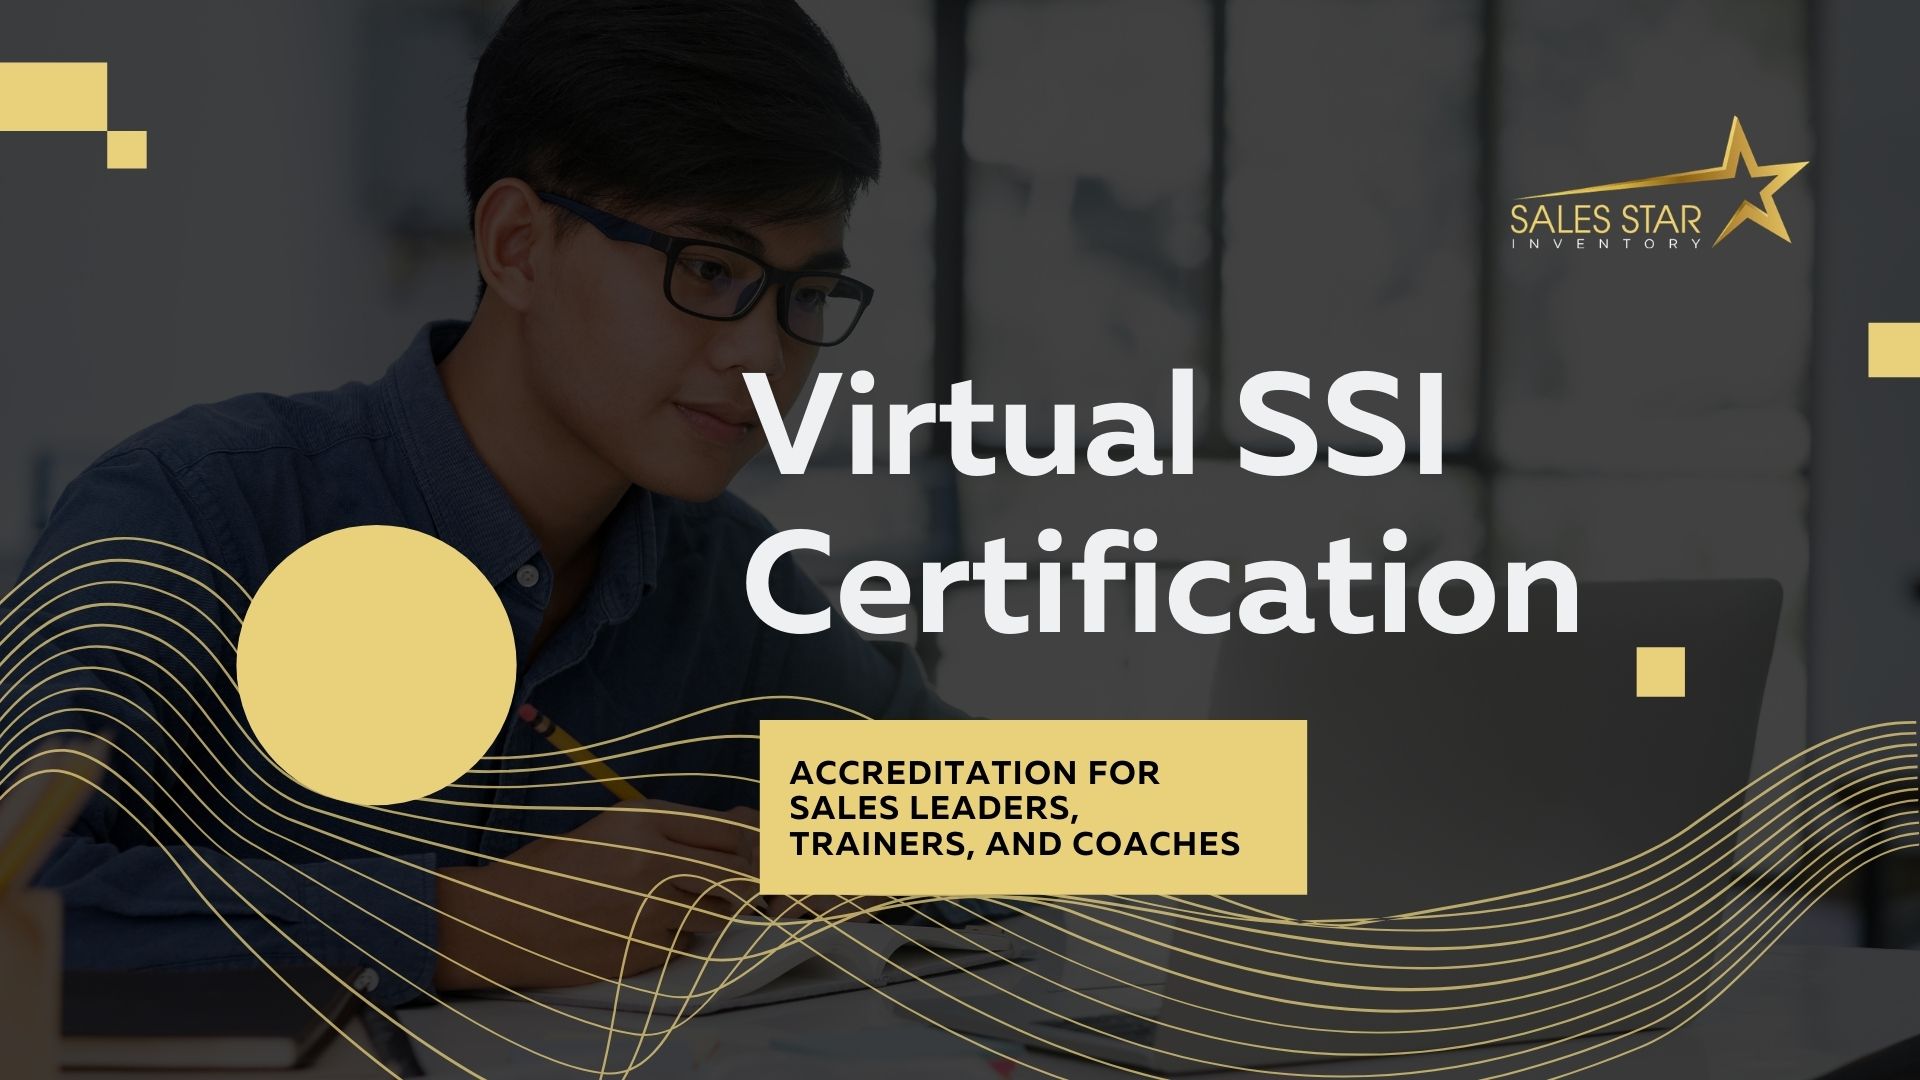 Virtual Sales Star Inventory Certification